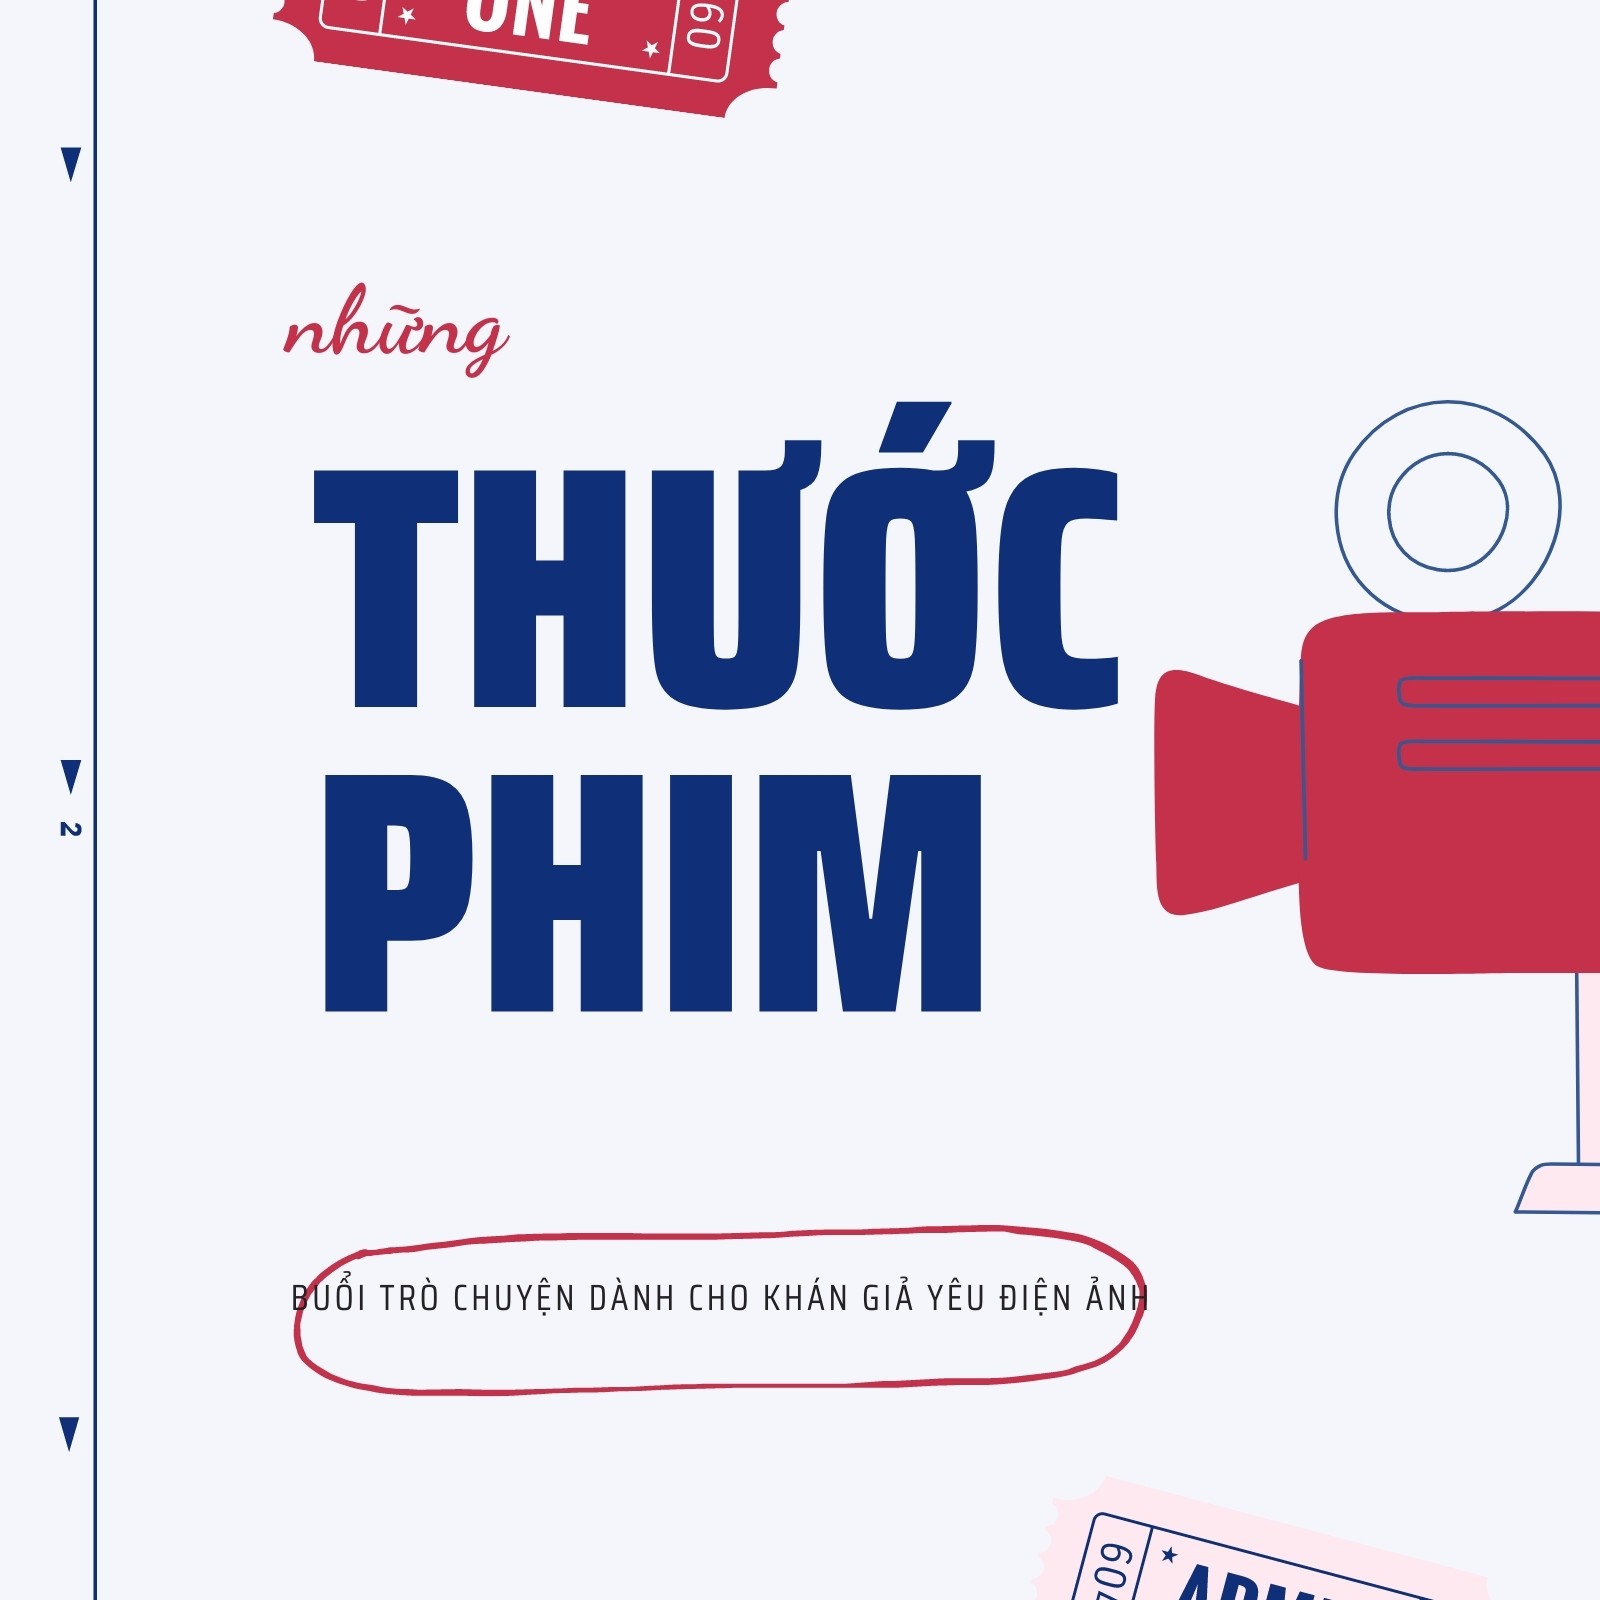 Podcast cover template: Mẫu Viết podcast cover template Đẹp, Miễn ...